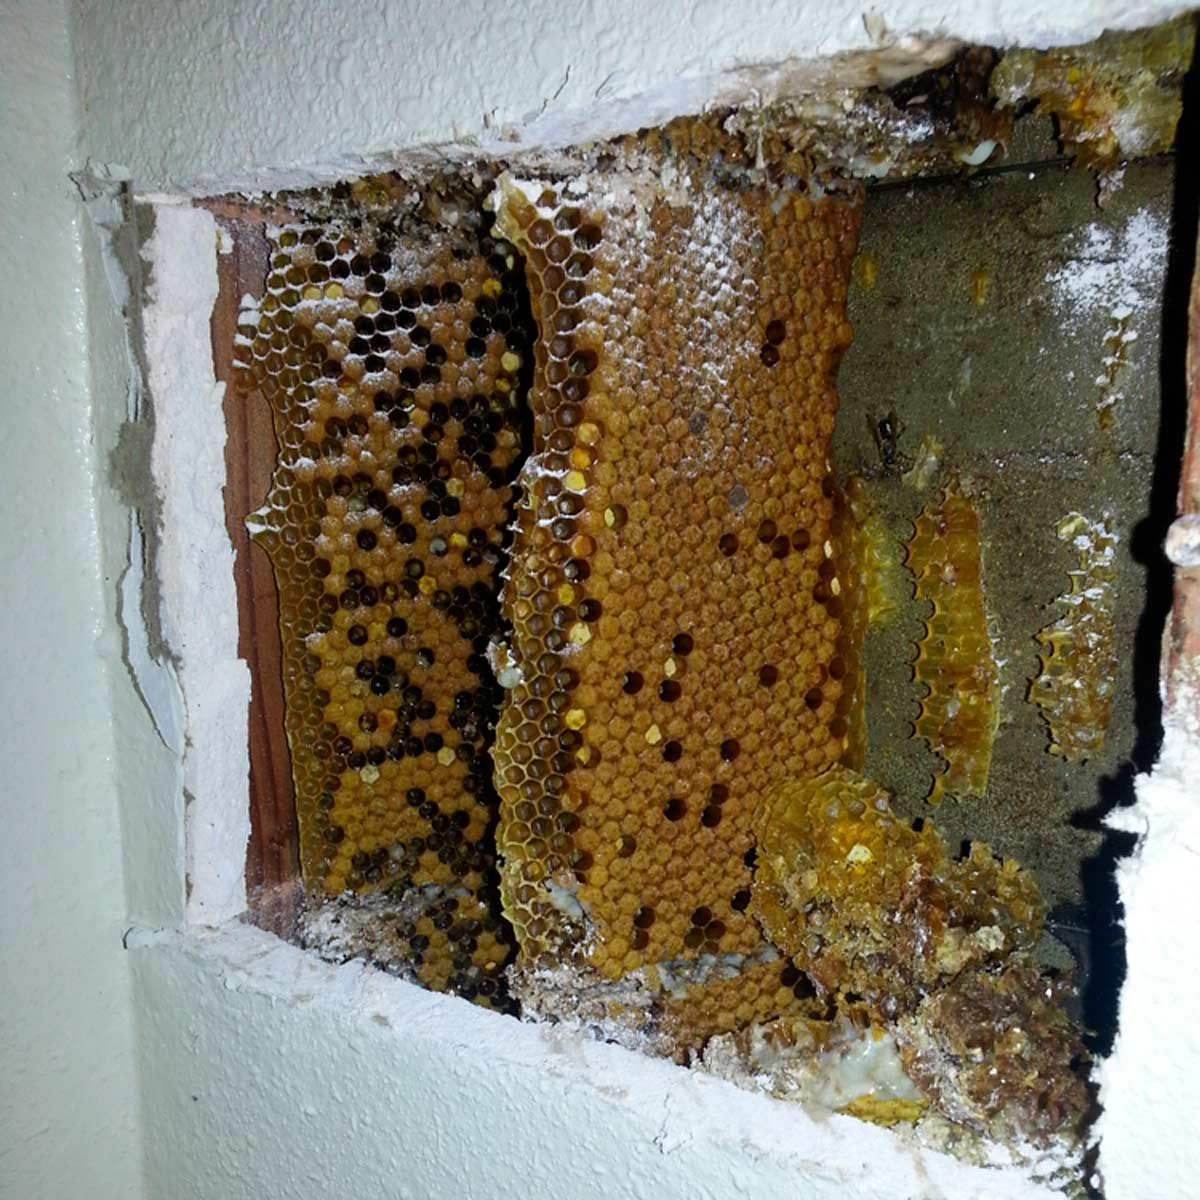 Why Do Some Old Homes Have a Beehive Built Into a Wall?